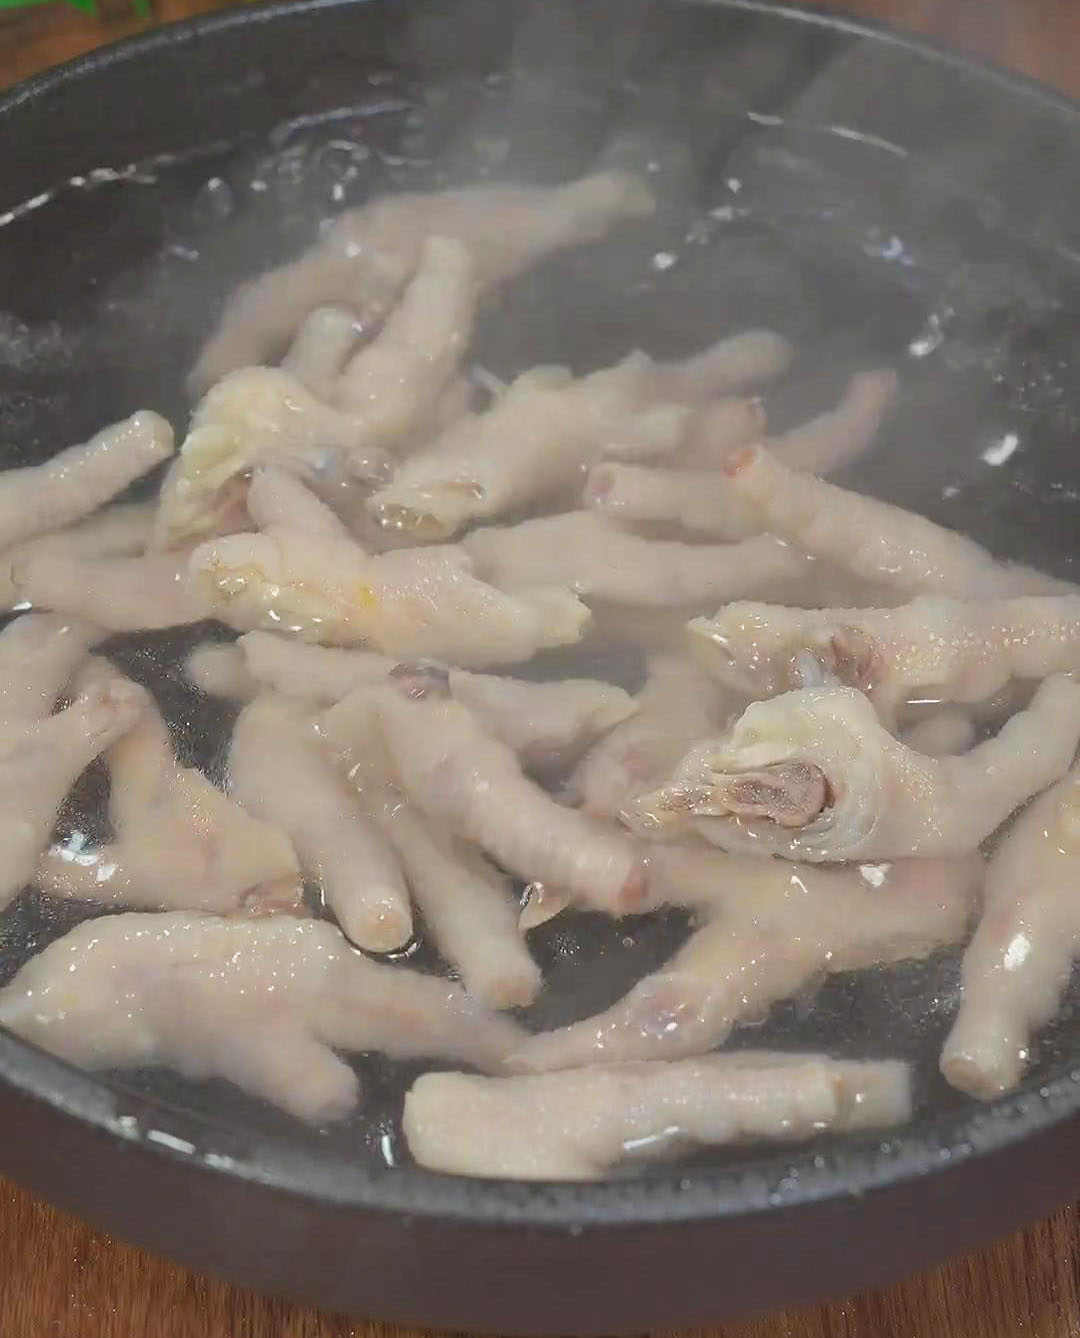 chicken feet after cooking